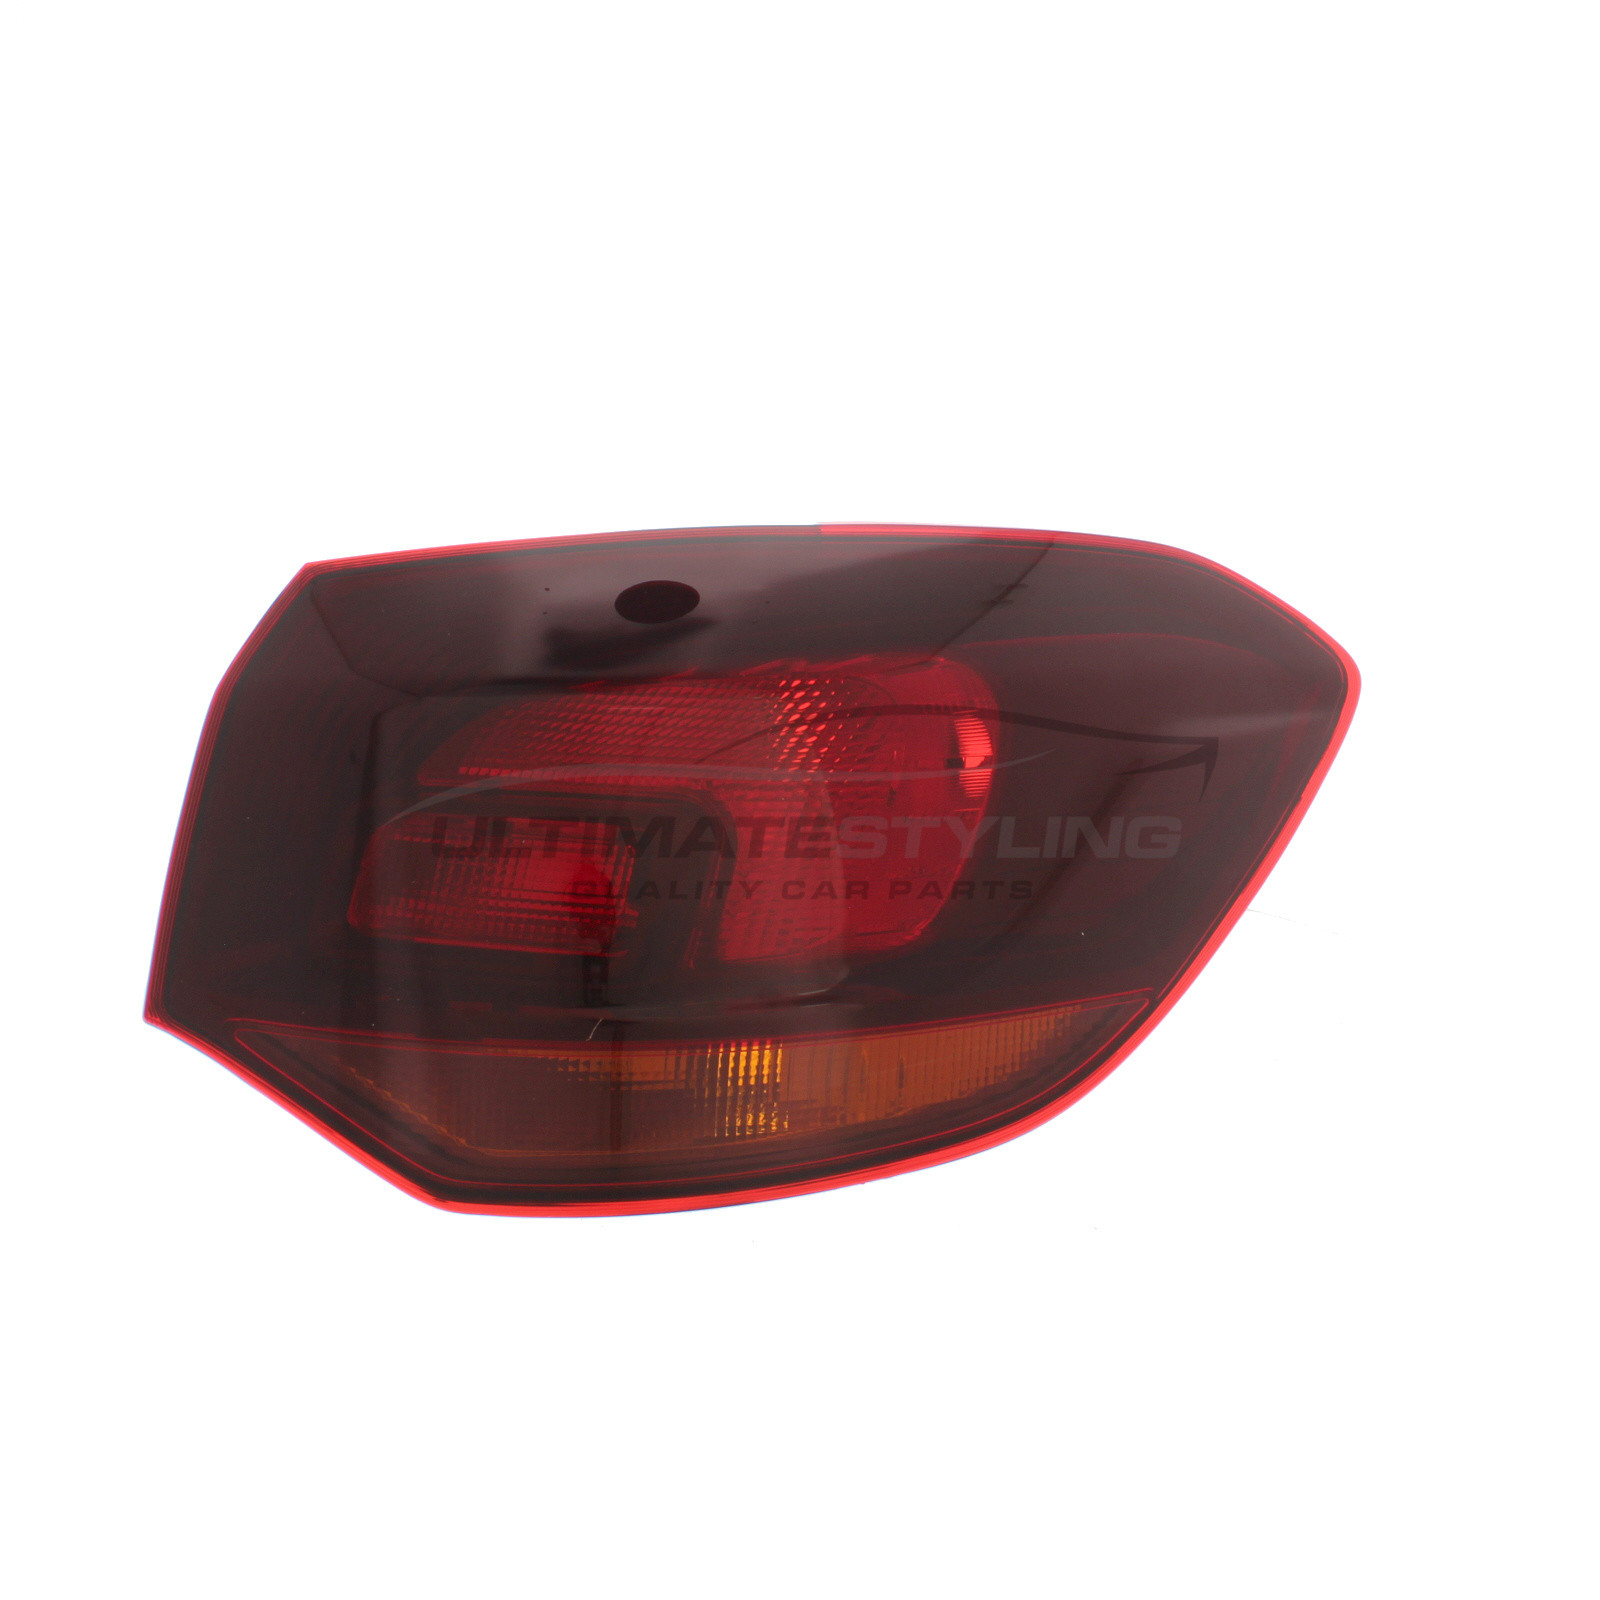 Rear Light / Tail Light for Vauxhall Astra